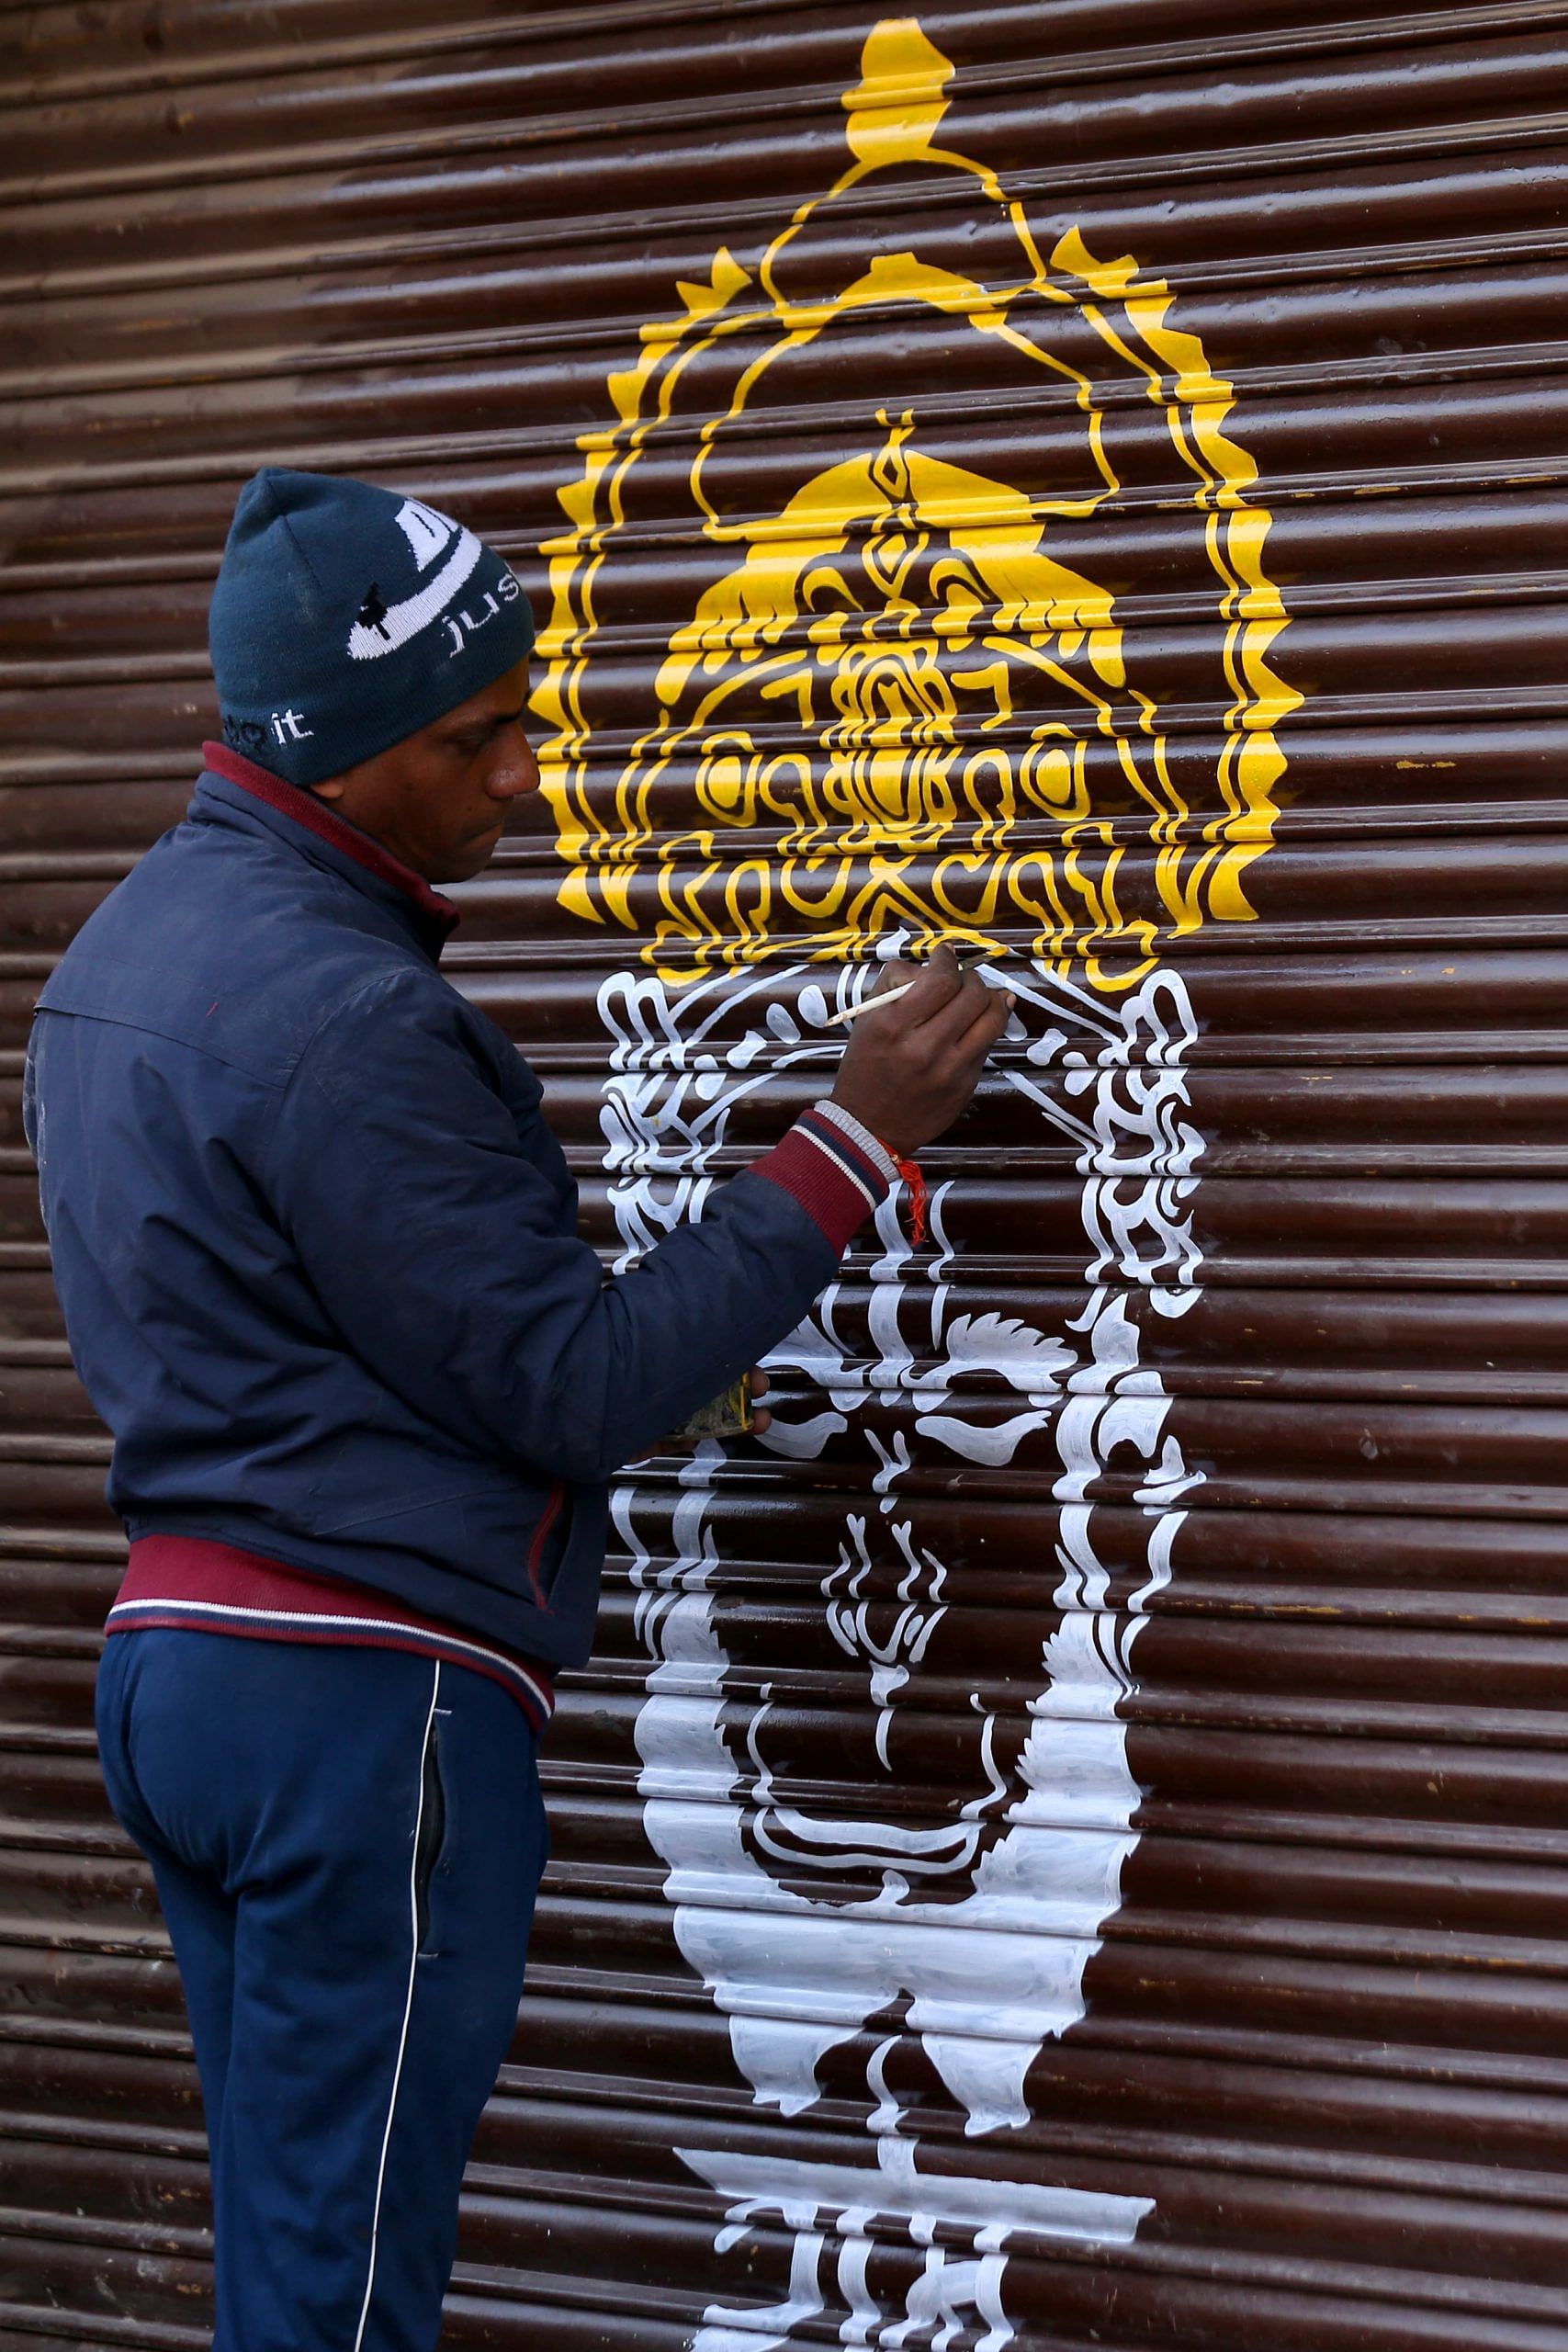 Ram is the first and last word in Ayodhya. Here an artist paints an image of the deity on the shutters of a shop near the Ram temple in Ayodhya | Photo: Suraj Singh Bisht | ThePrint